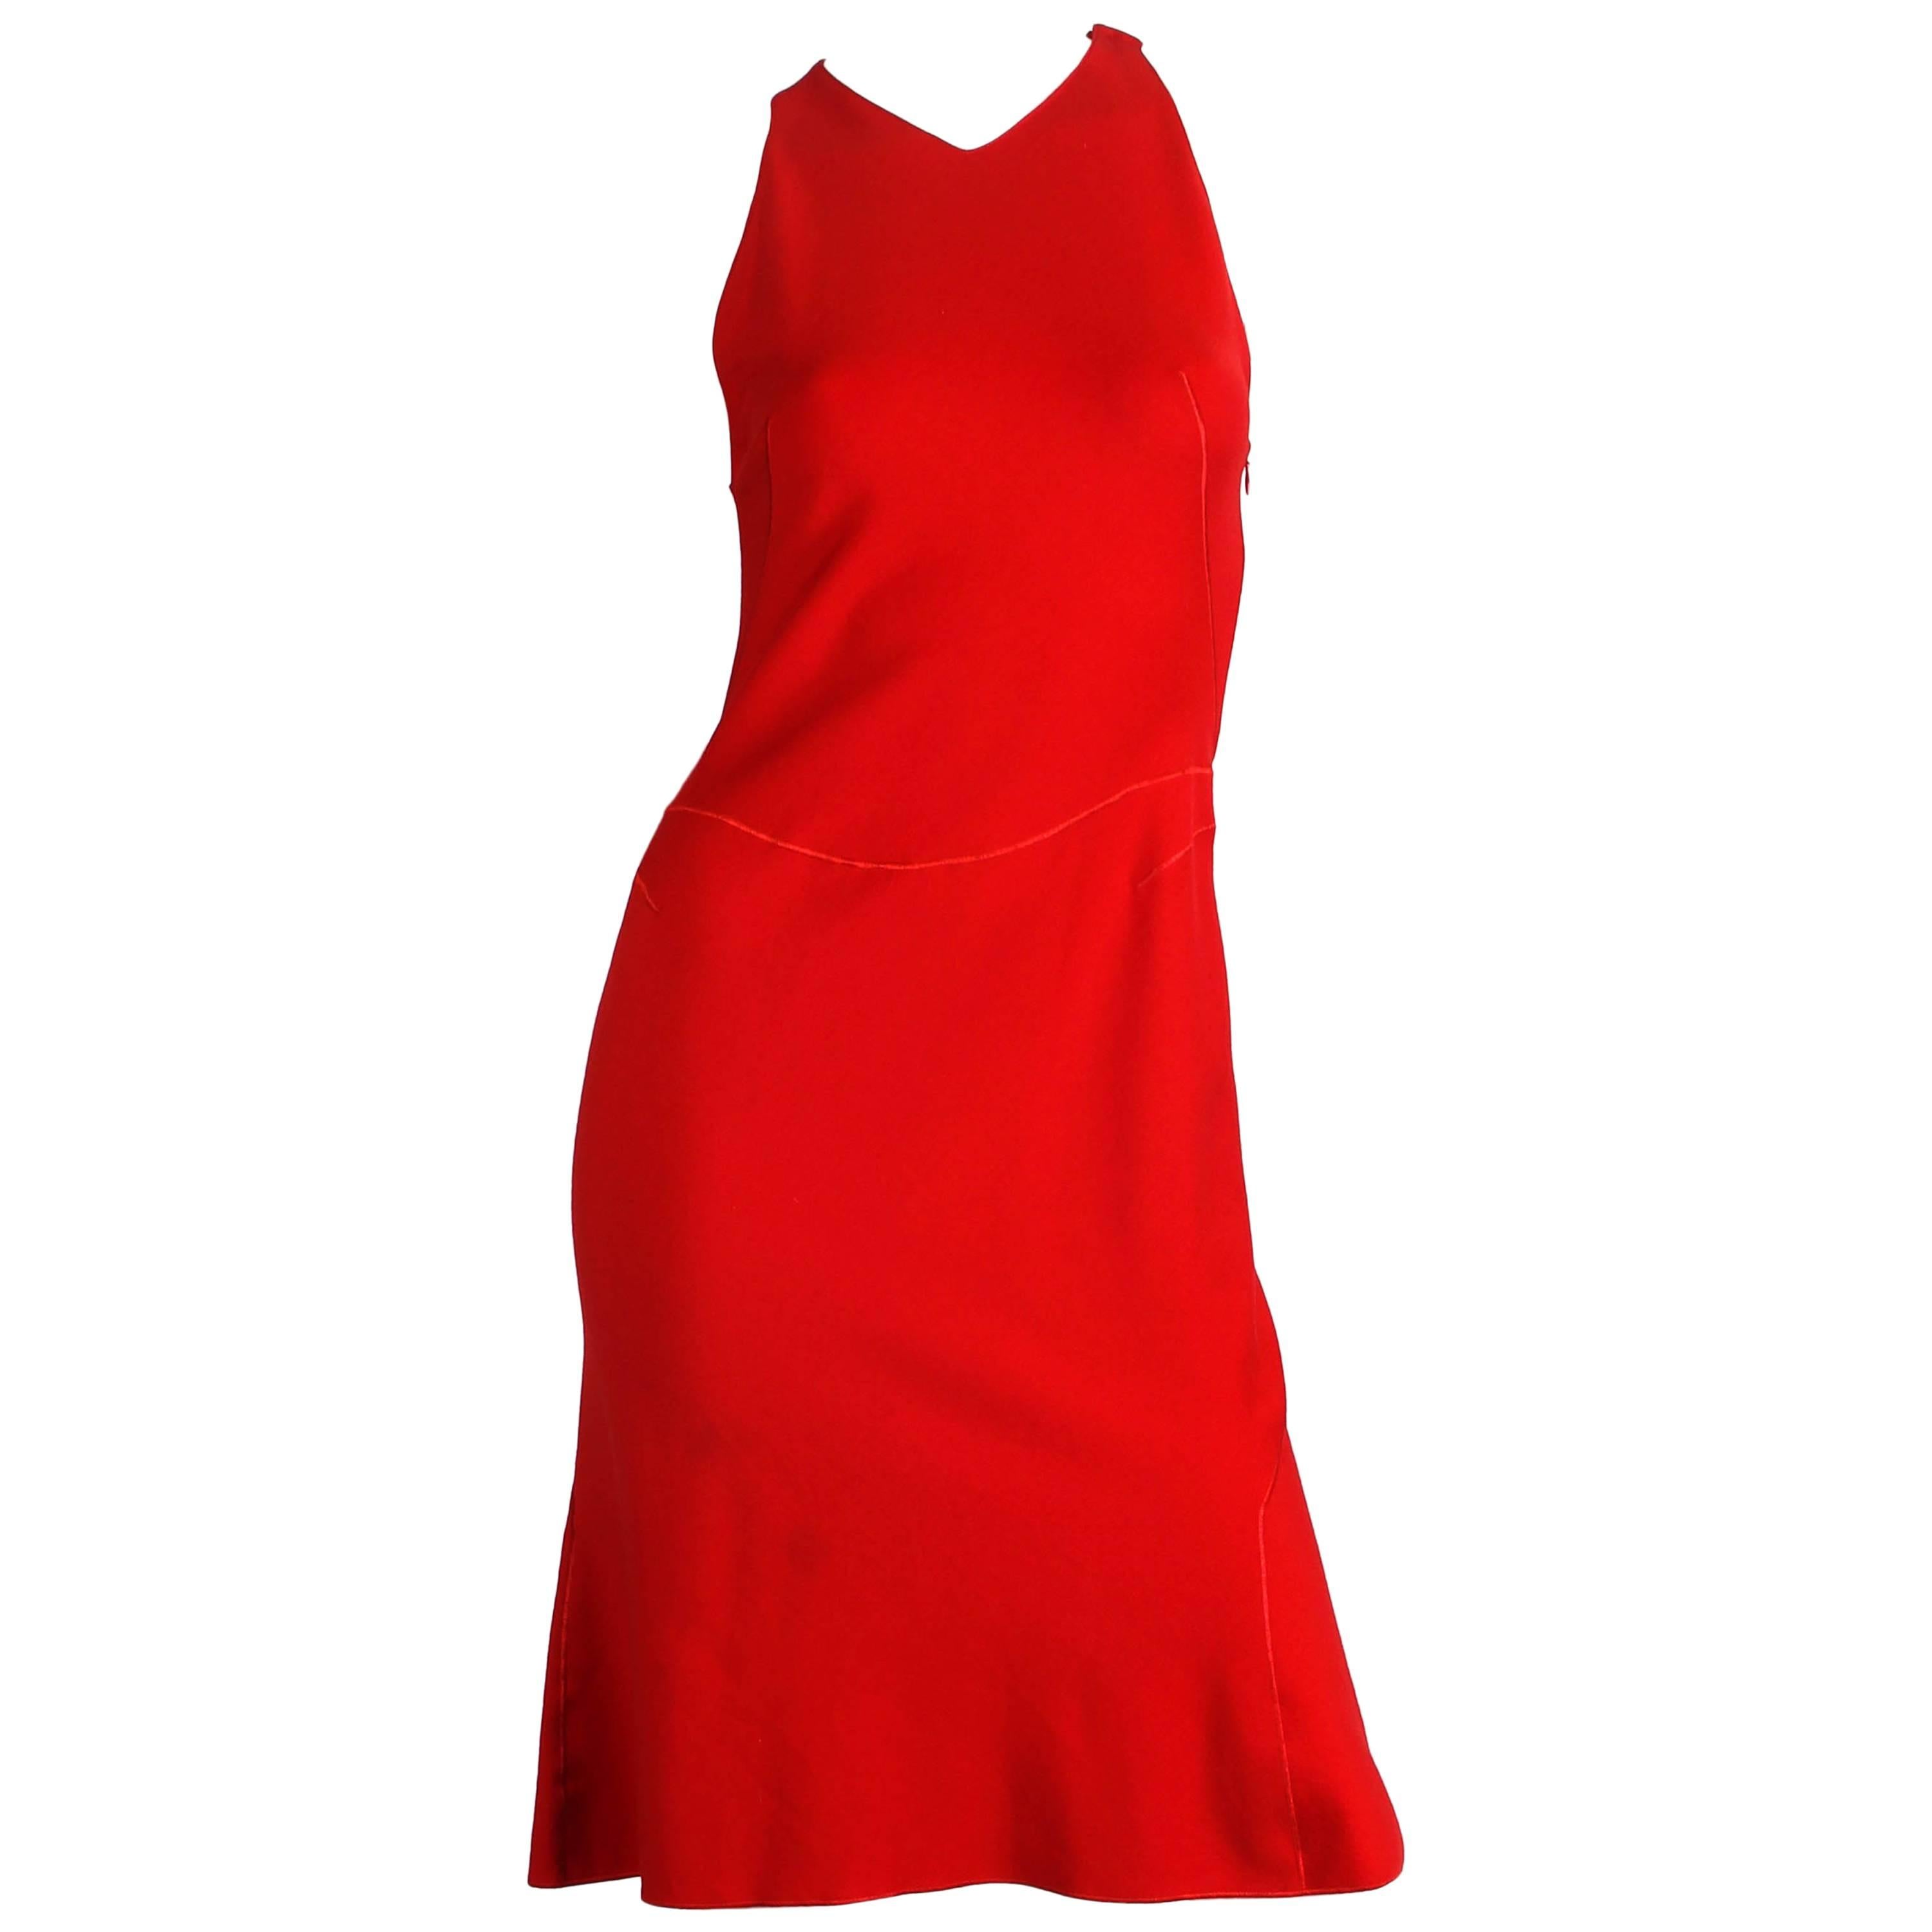 Alaia Dress in very rare to find Red